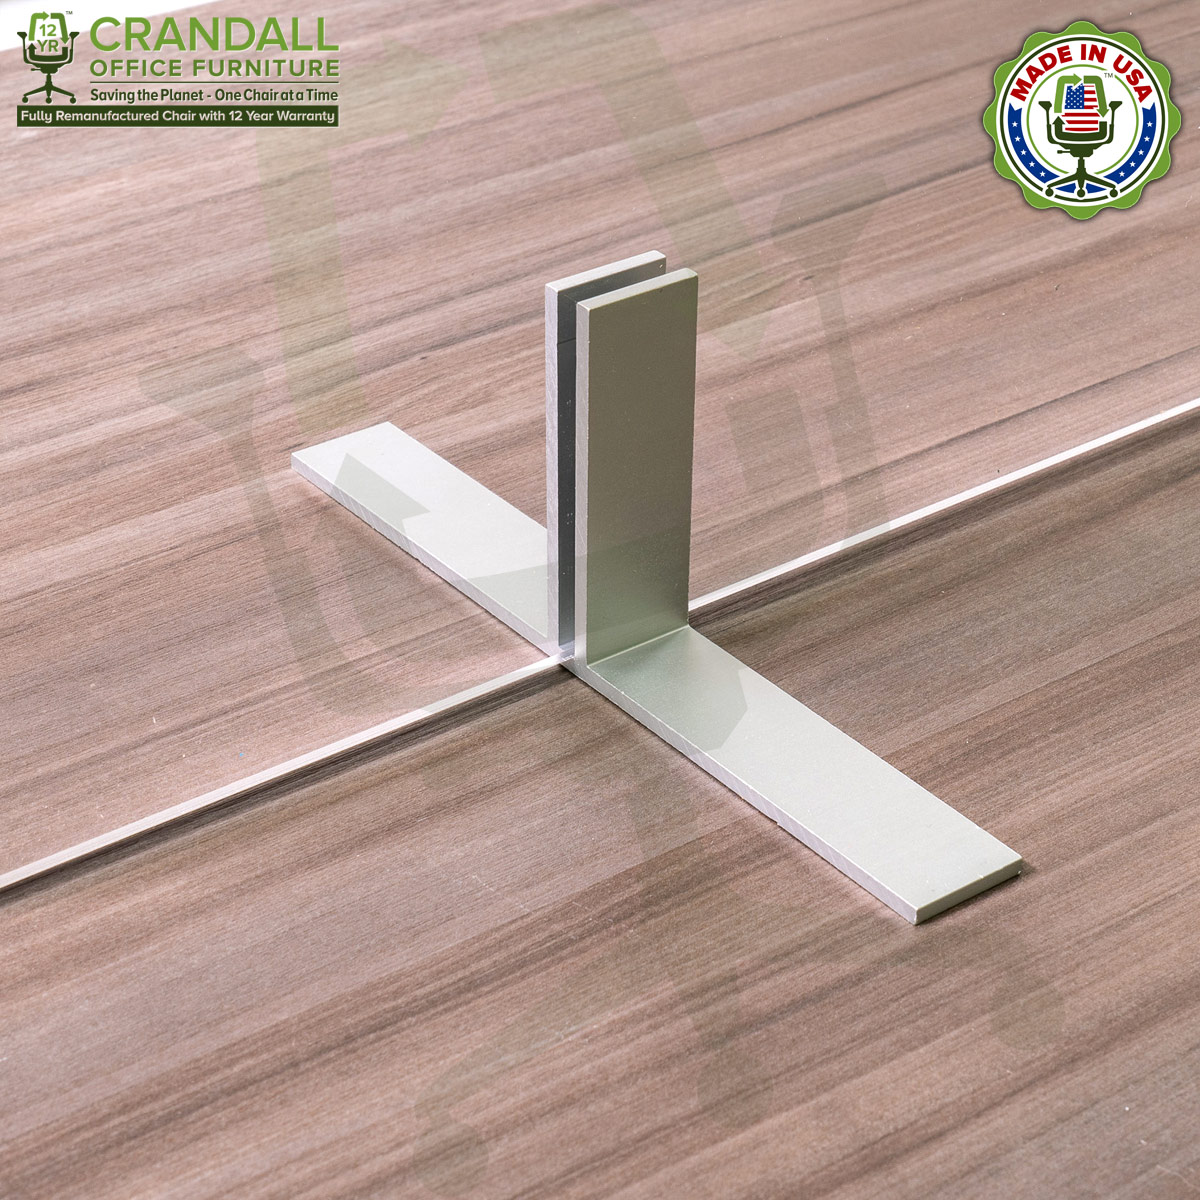 Table Top Free Standing Plexiglass & Acrylic Barrier Brackets - 10 Pack -  Crandall Office Furniture